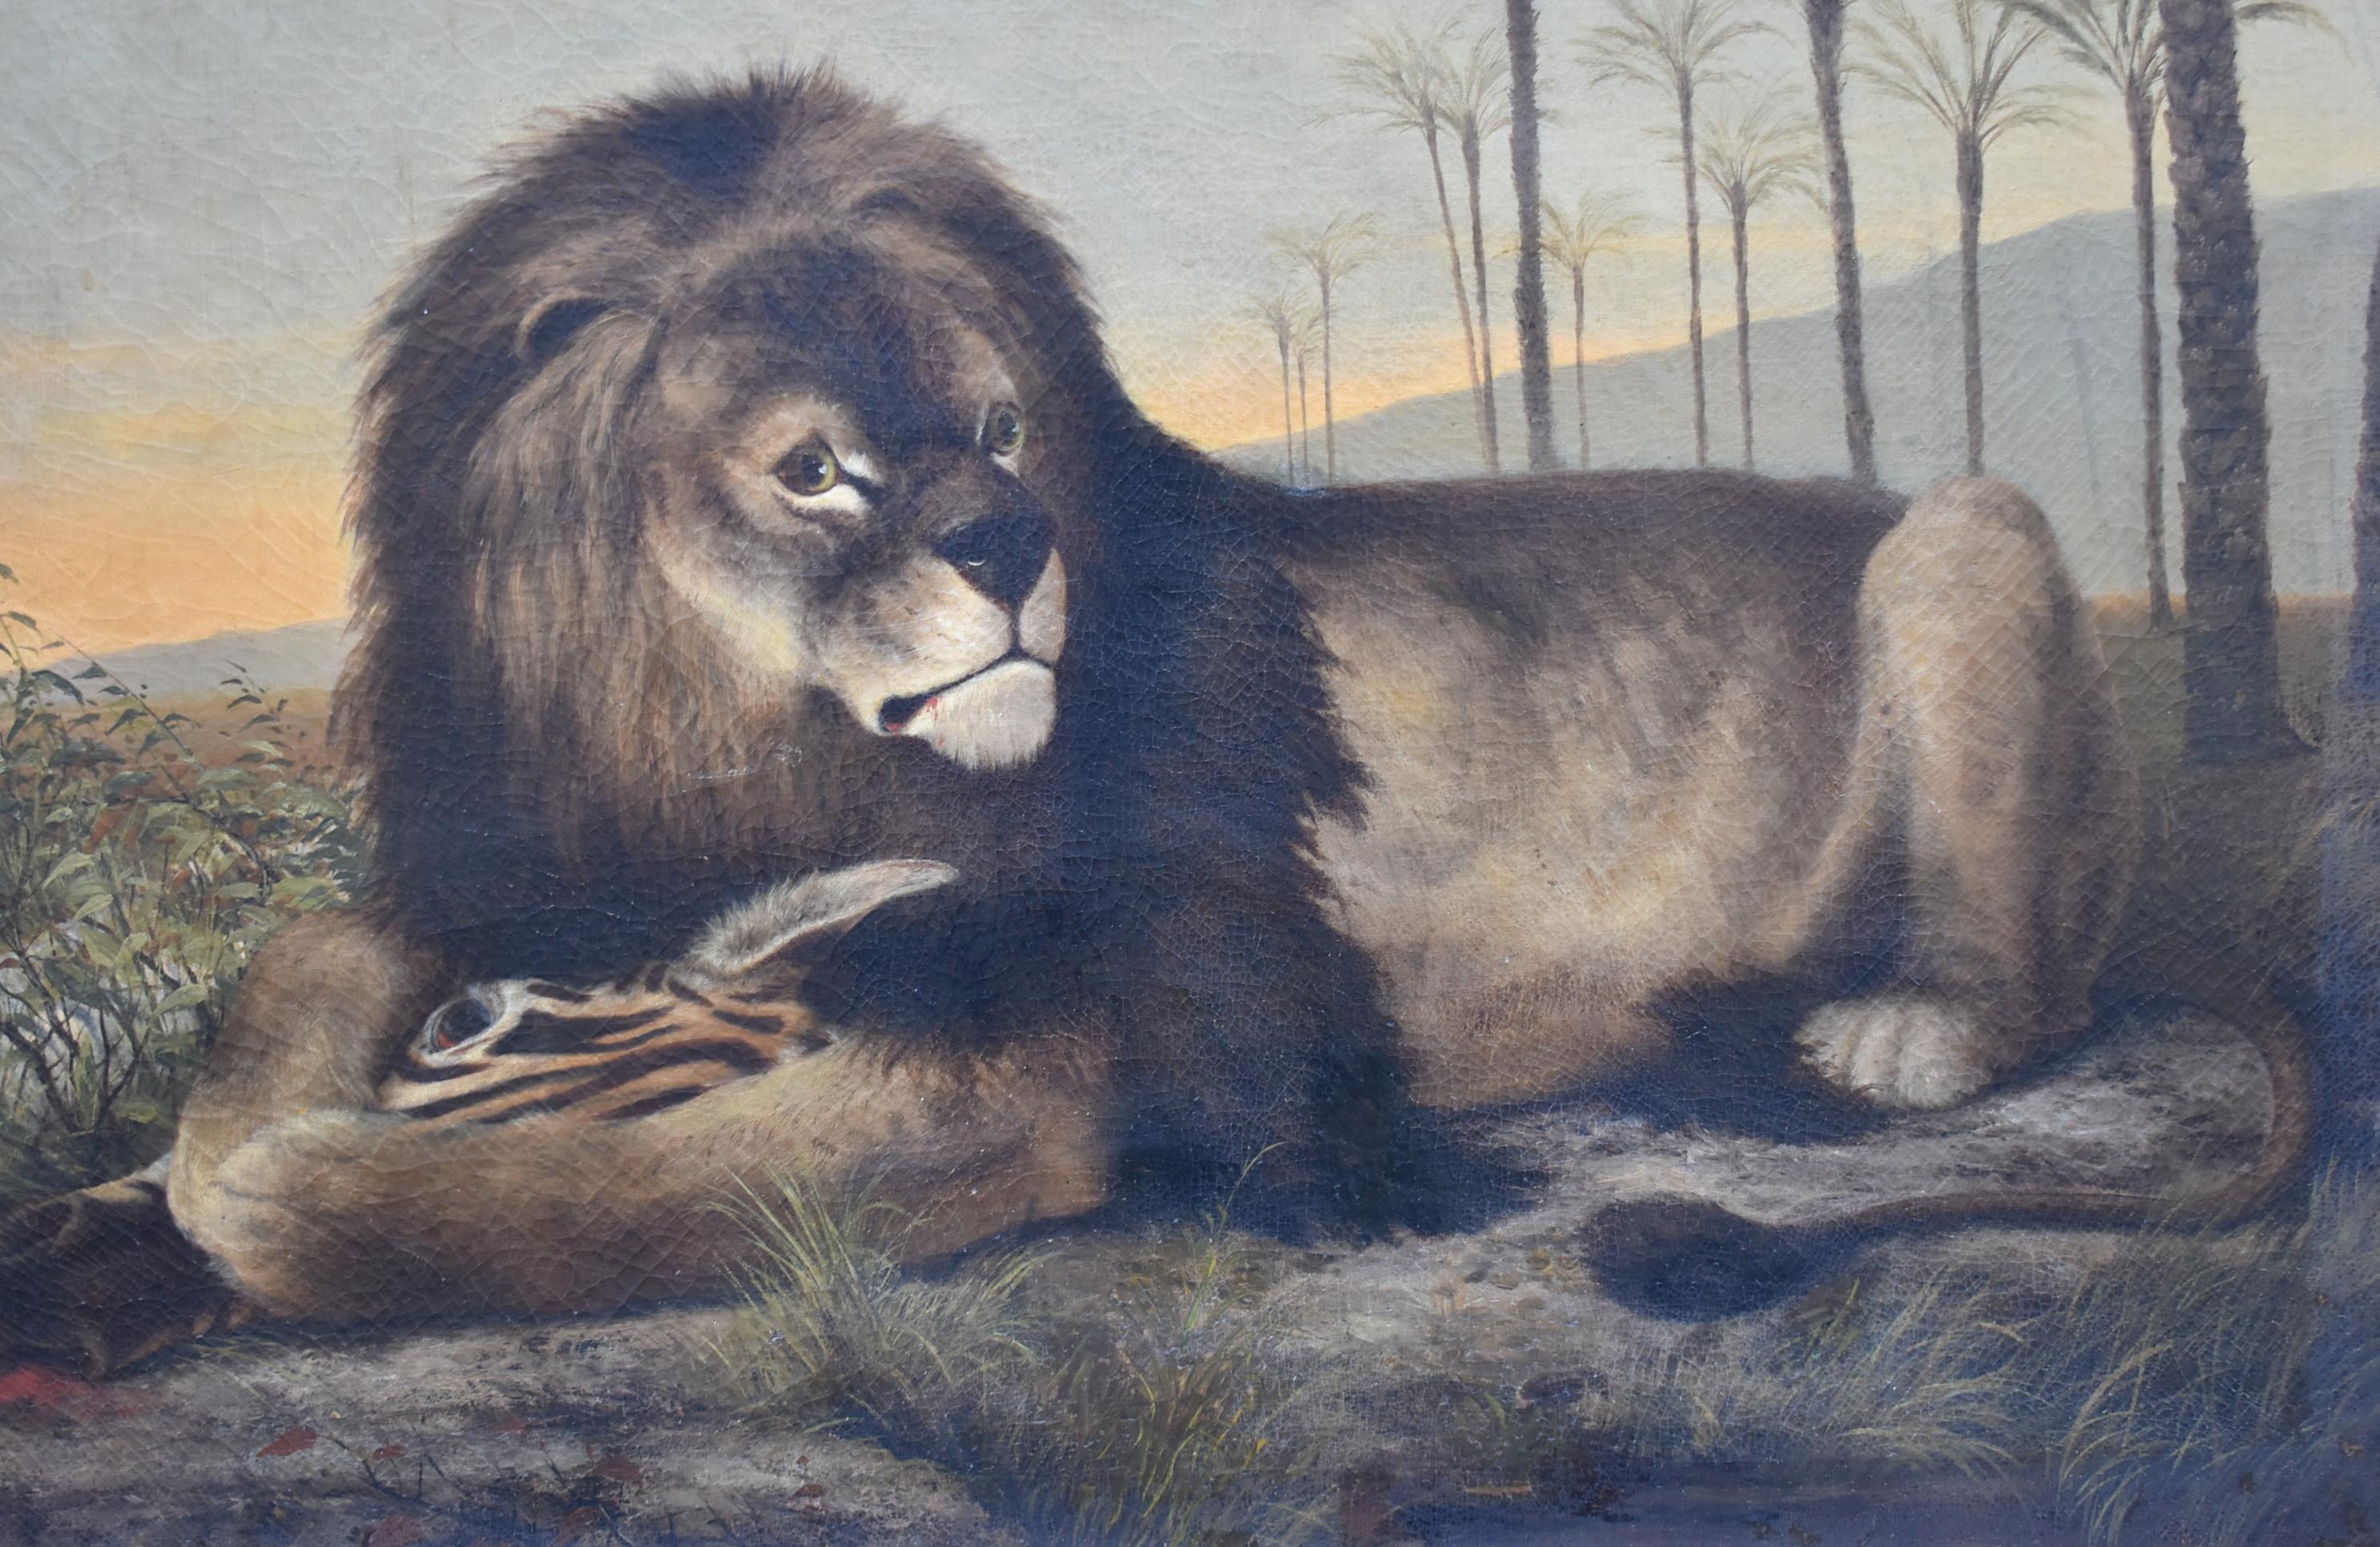 Vintage 1880's African lion oil painting on canvas. Laying lion eating on a zebra with a sunset background and rows of palm trees. Great condition, minor repair on reverse side. Surface Craquelure unsigned. Dimensions: 45